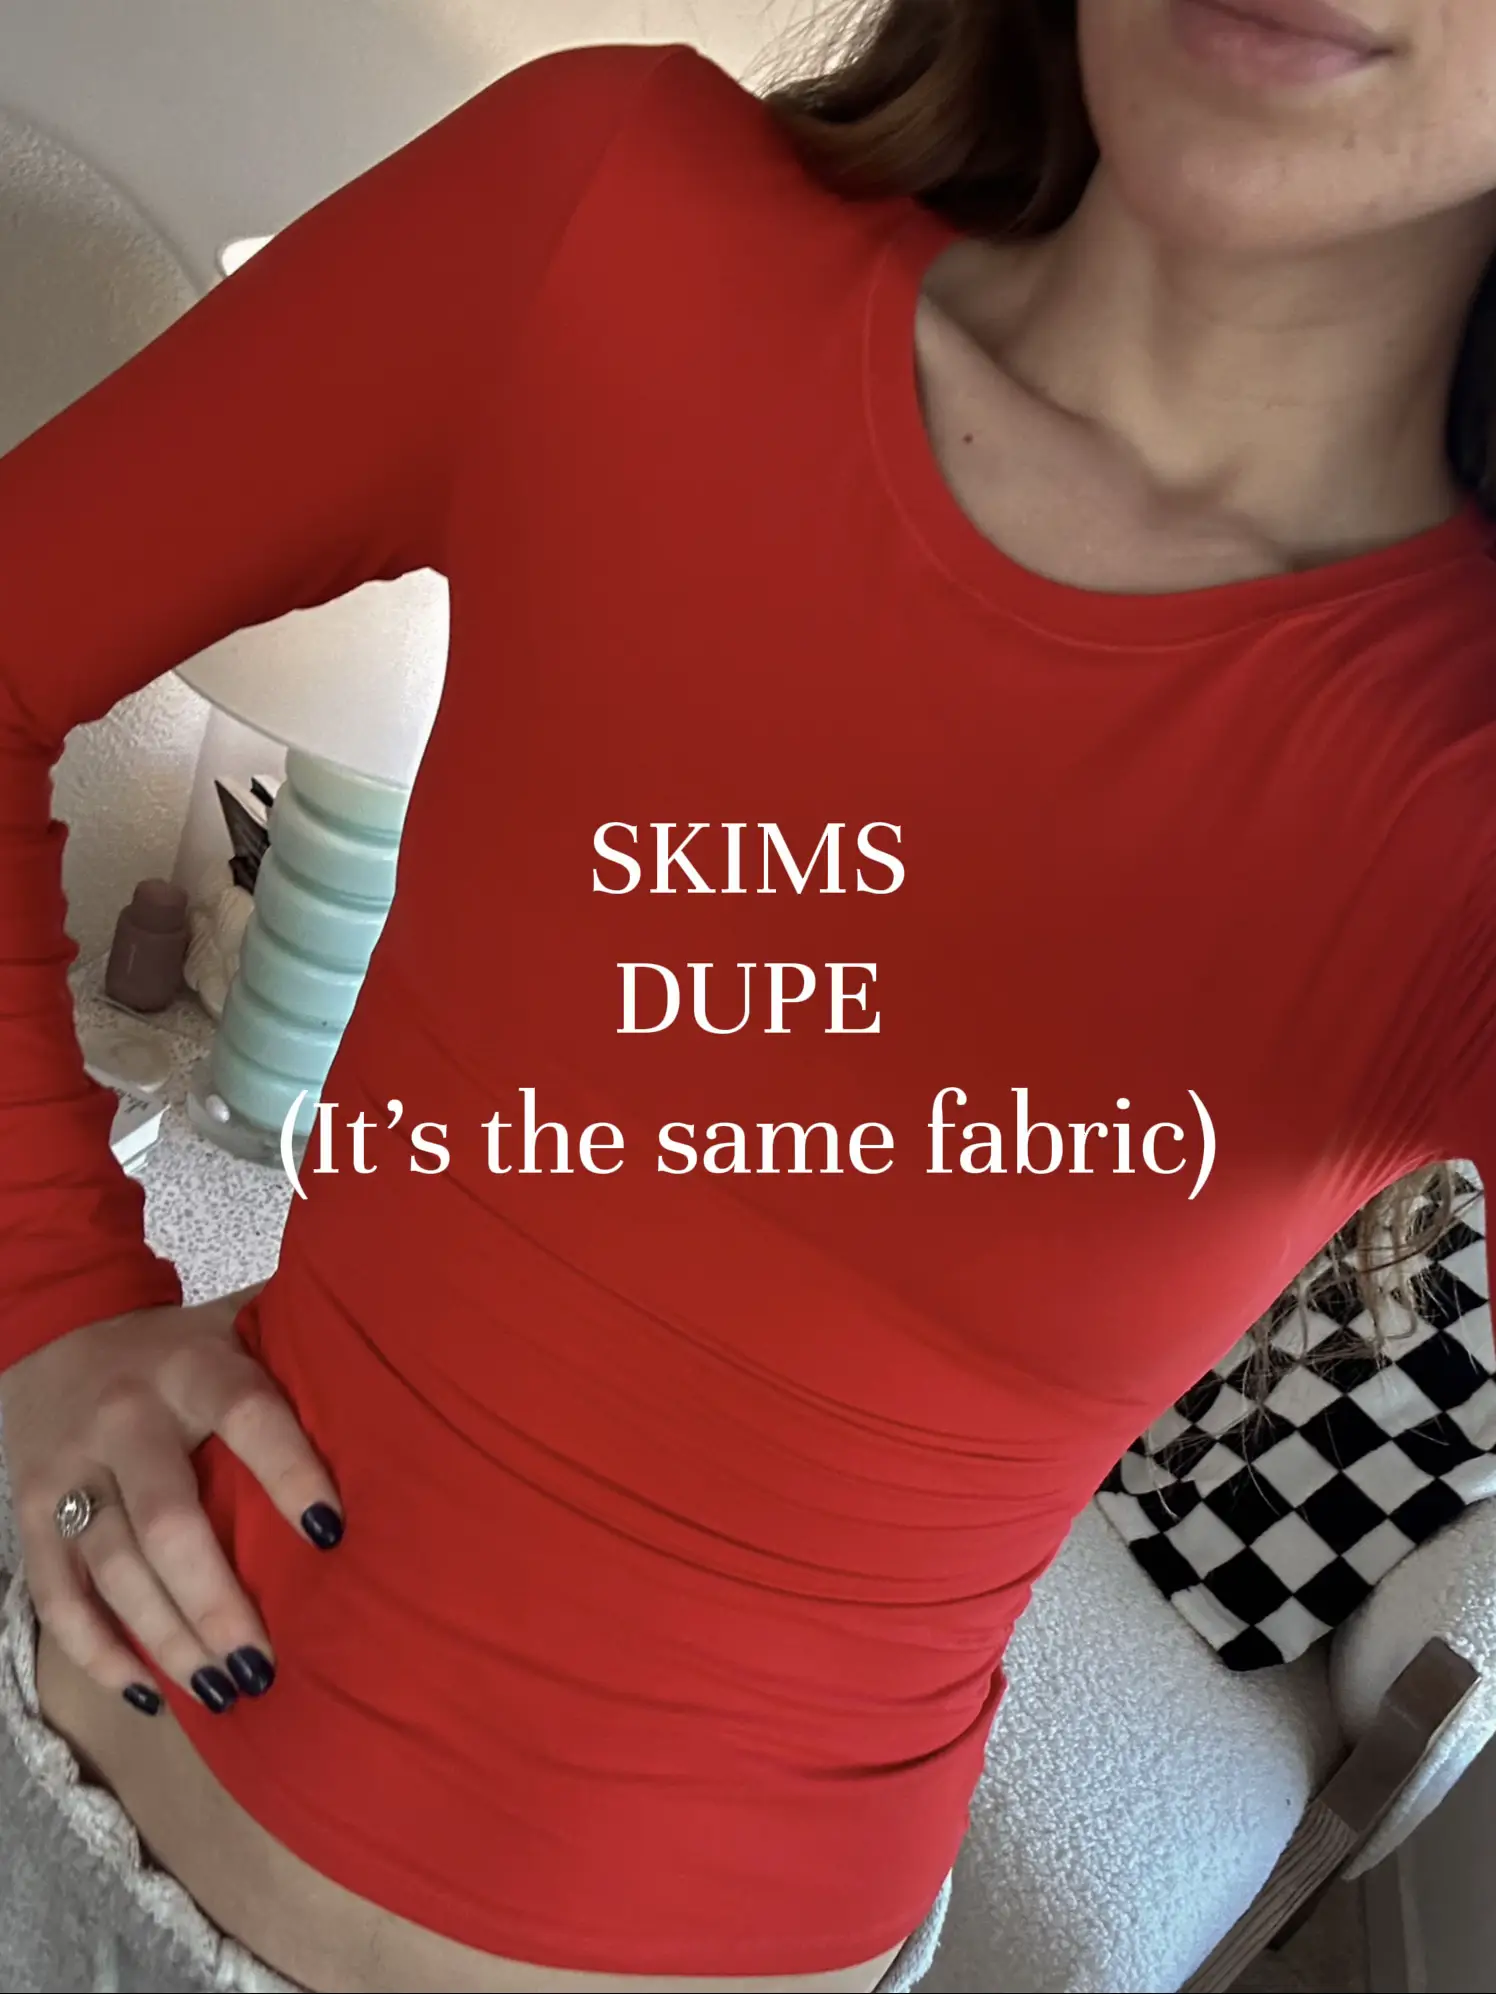 finds : Skims dupe, Gallery posted by Chrissy_Dastine